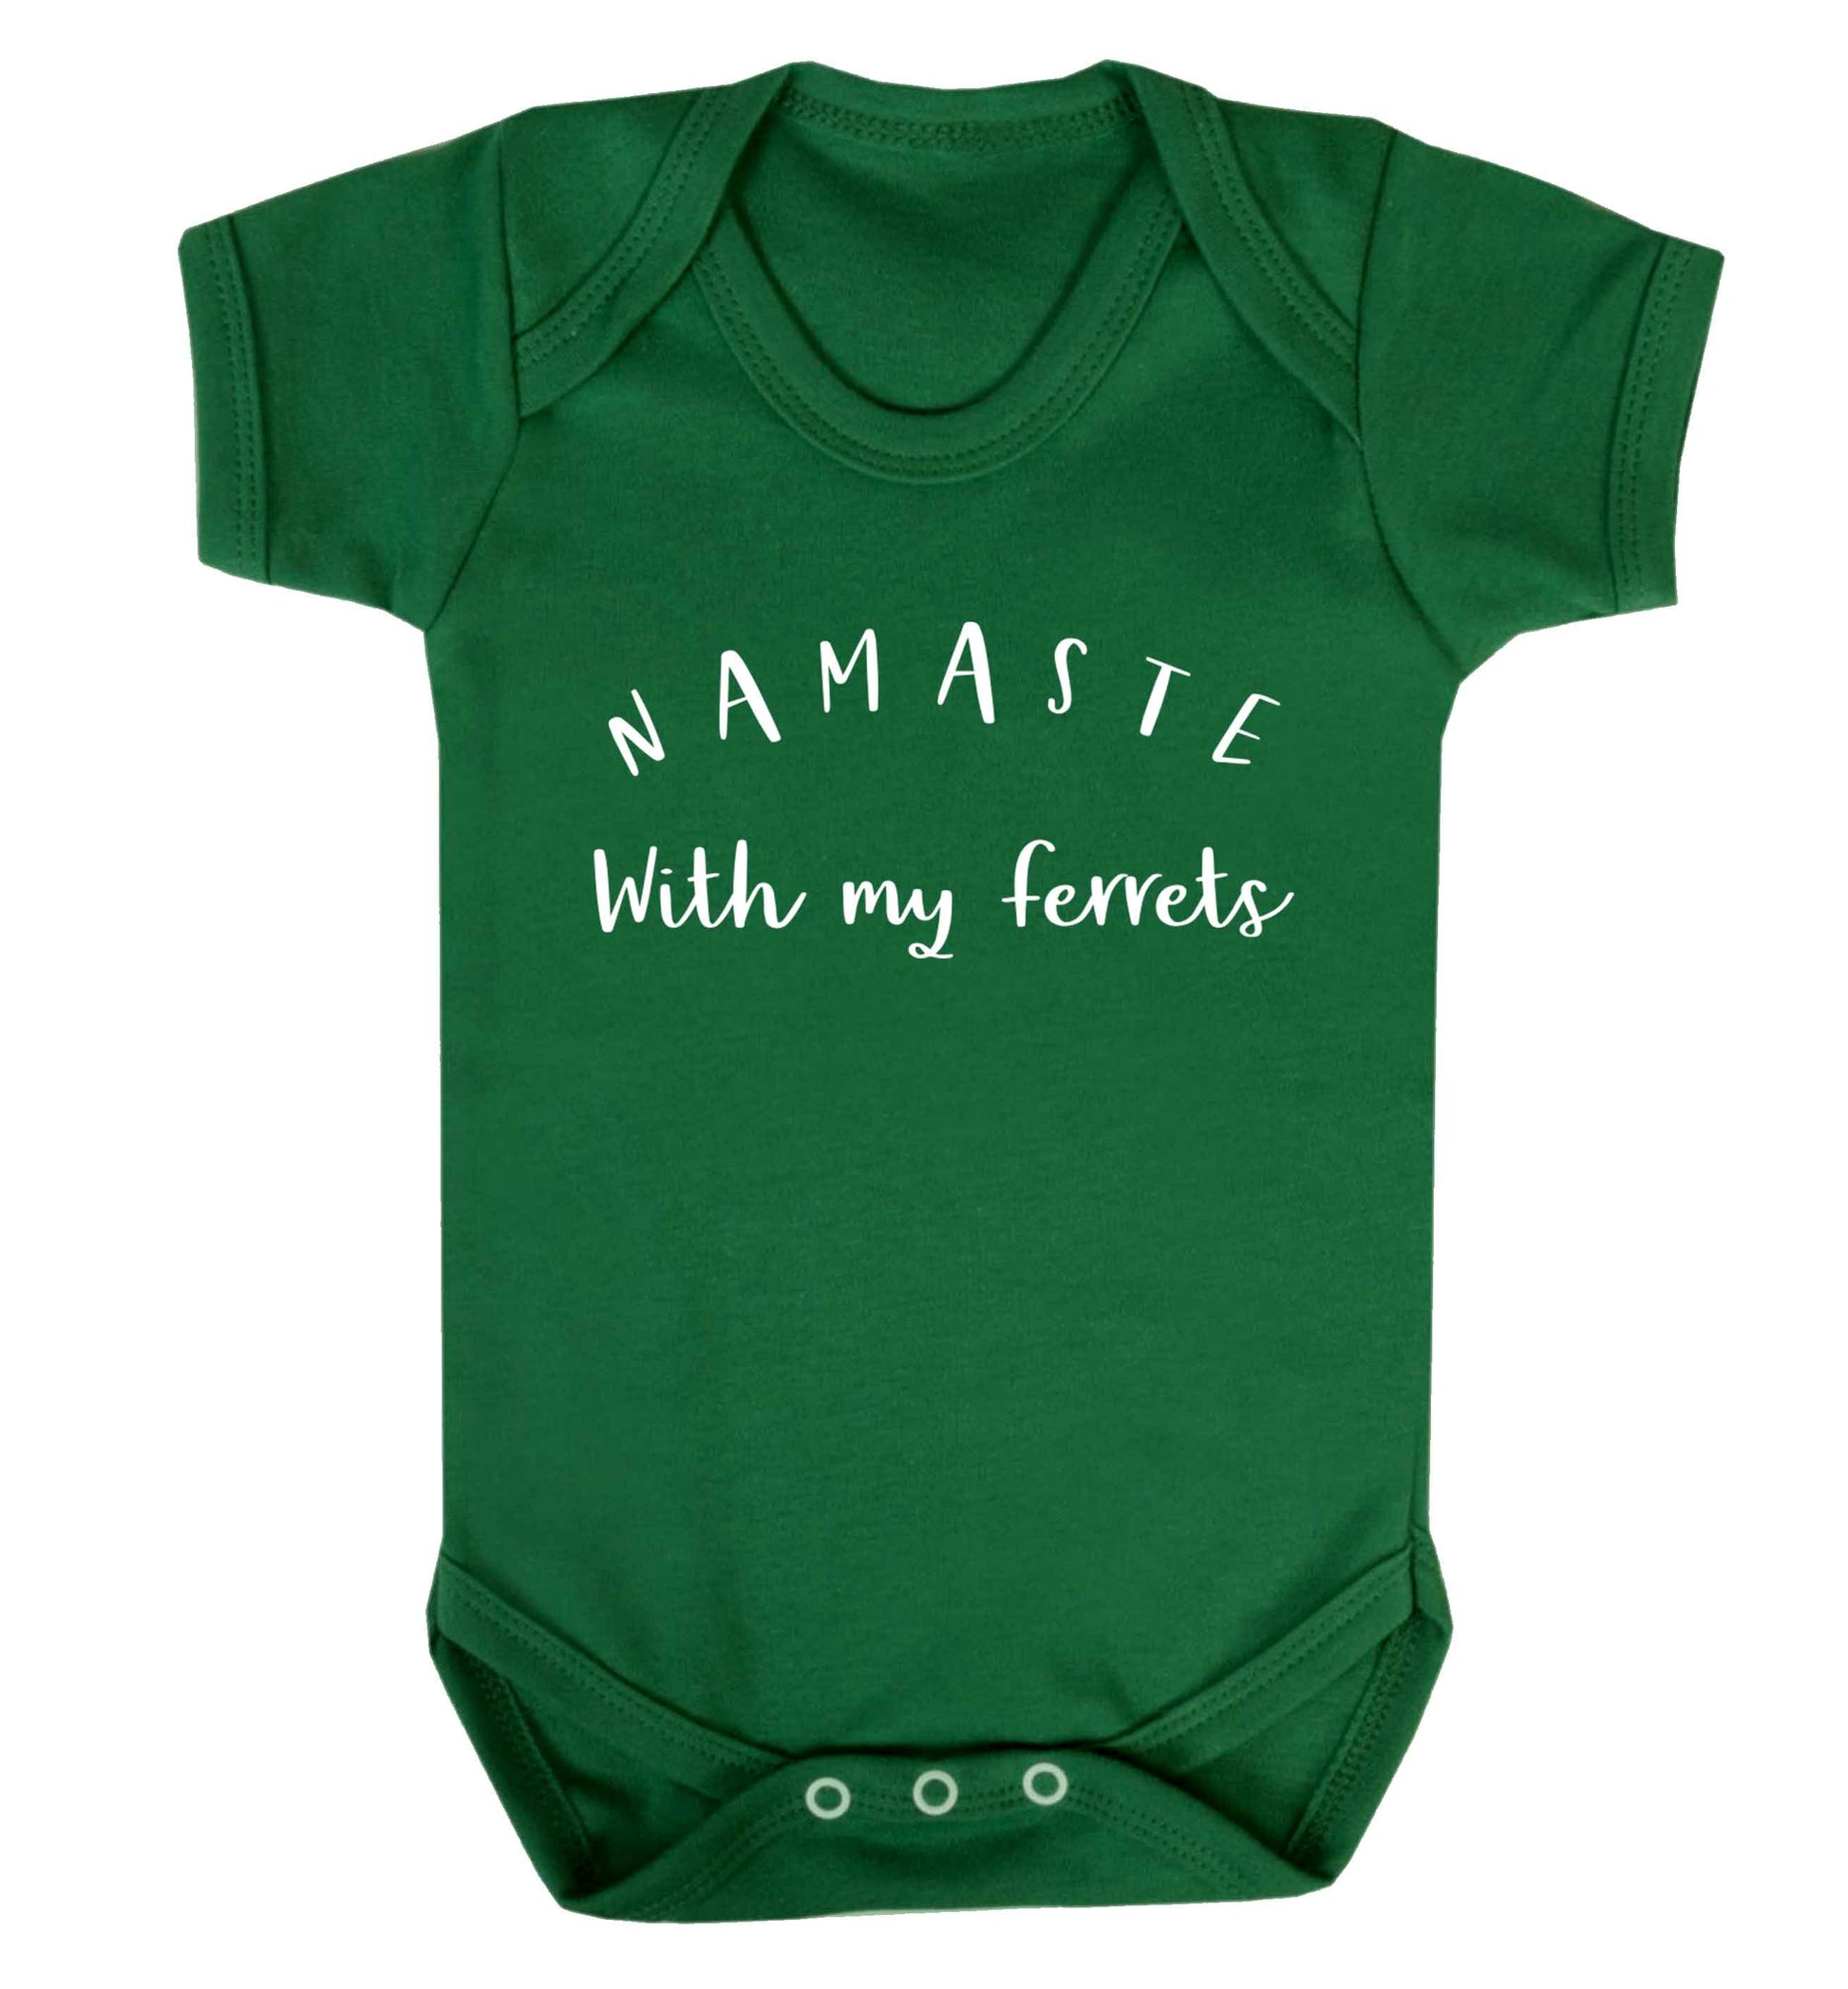 Namaste with my ferrets Baby Vest green 18-24 months